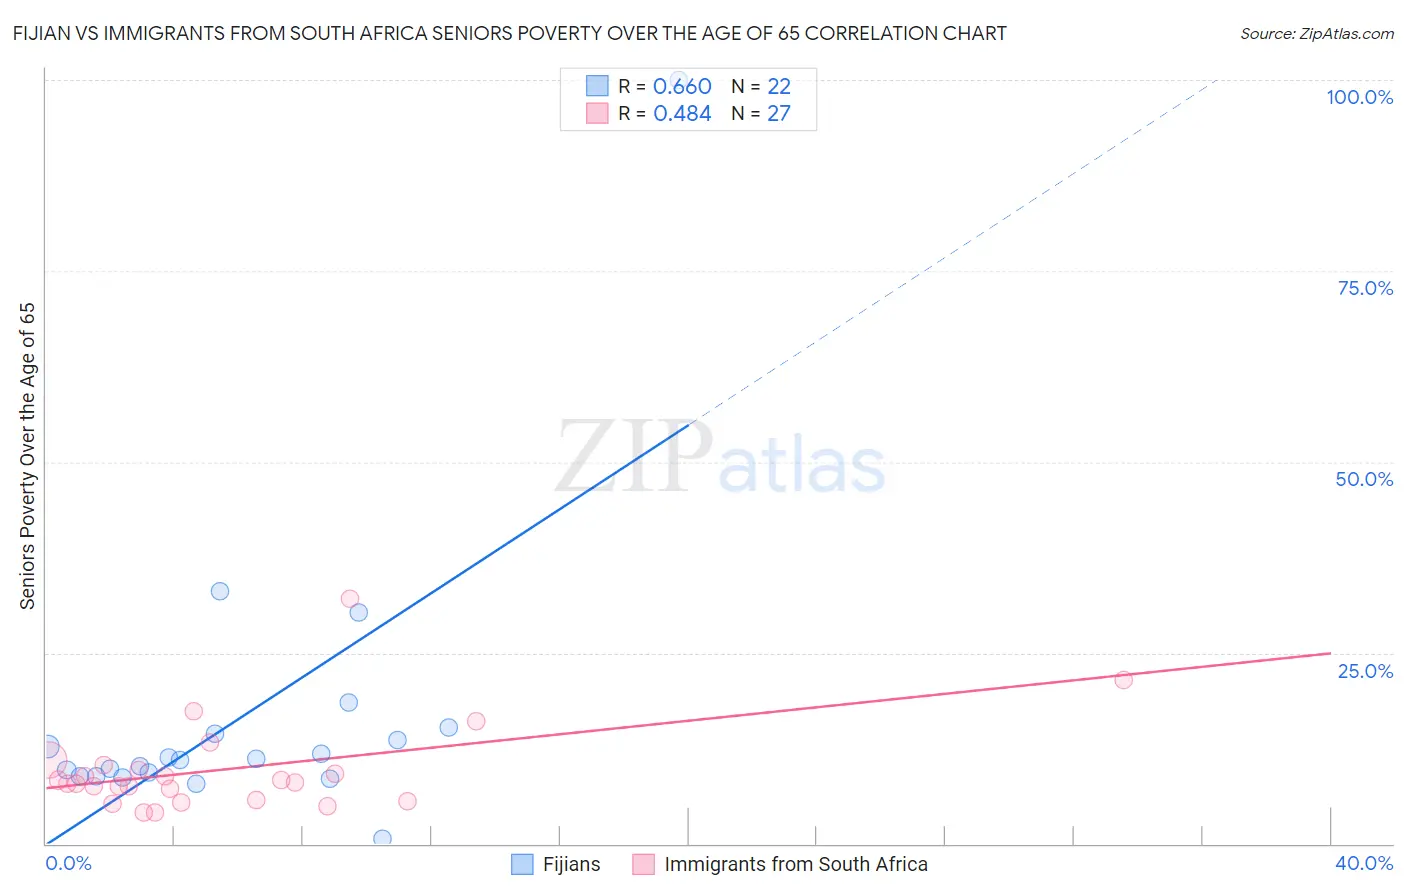 Fijian vs Immigrants from South Africa Seniors Poverty Over the Age of 65